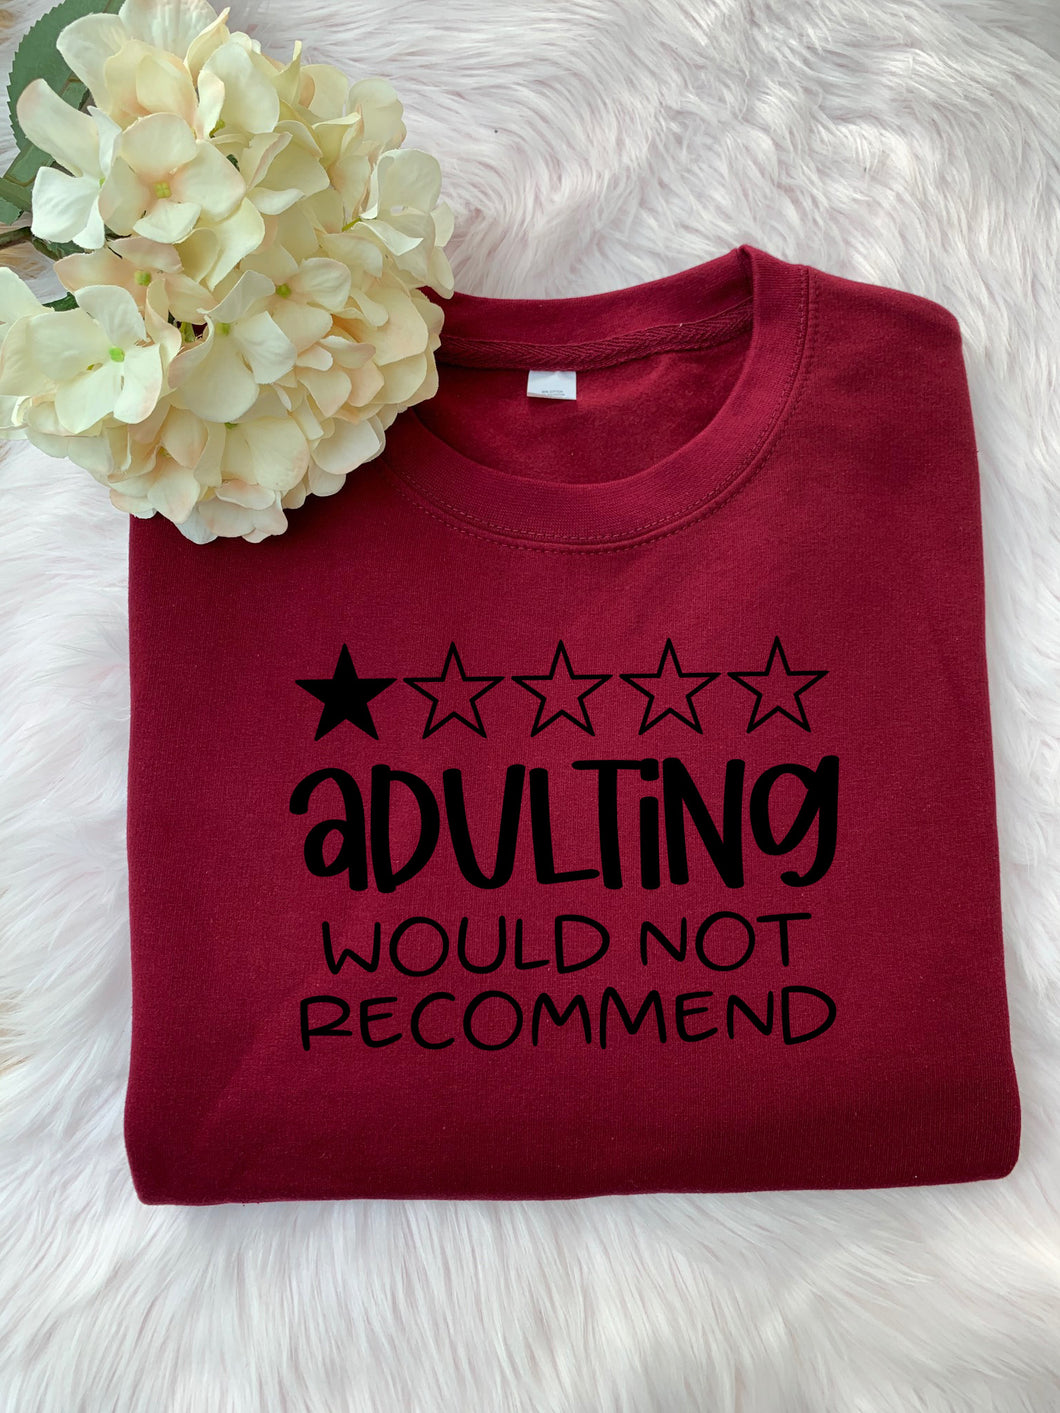 Adulting would not -  Jumper